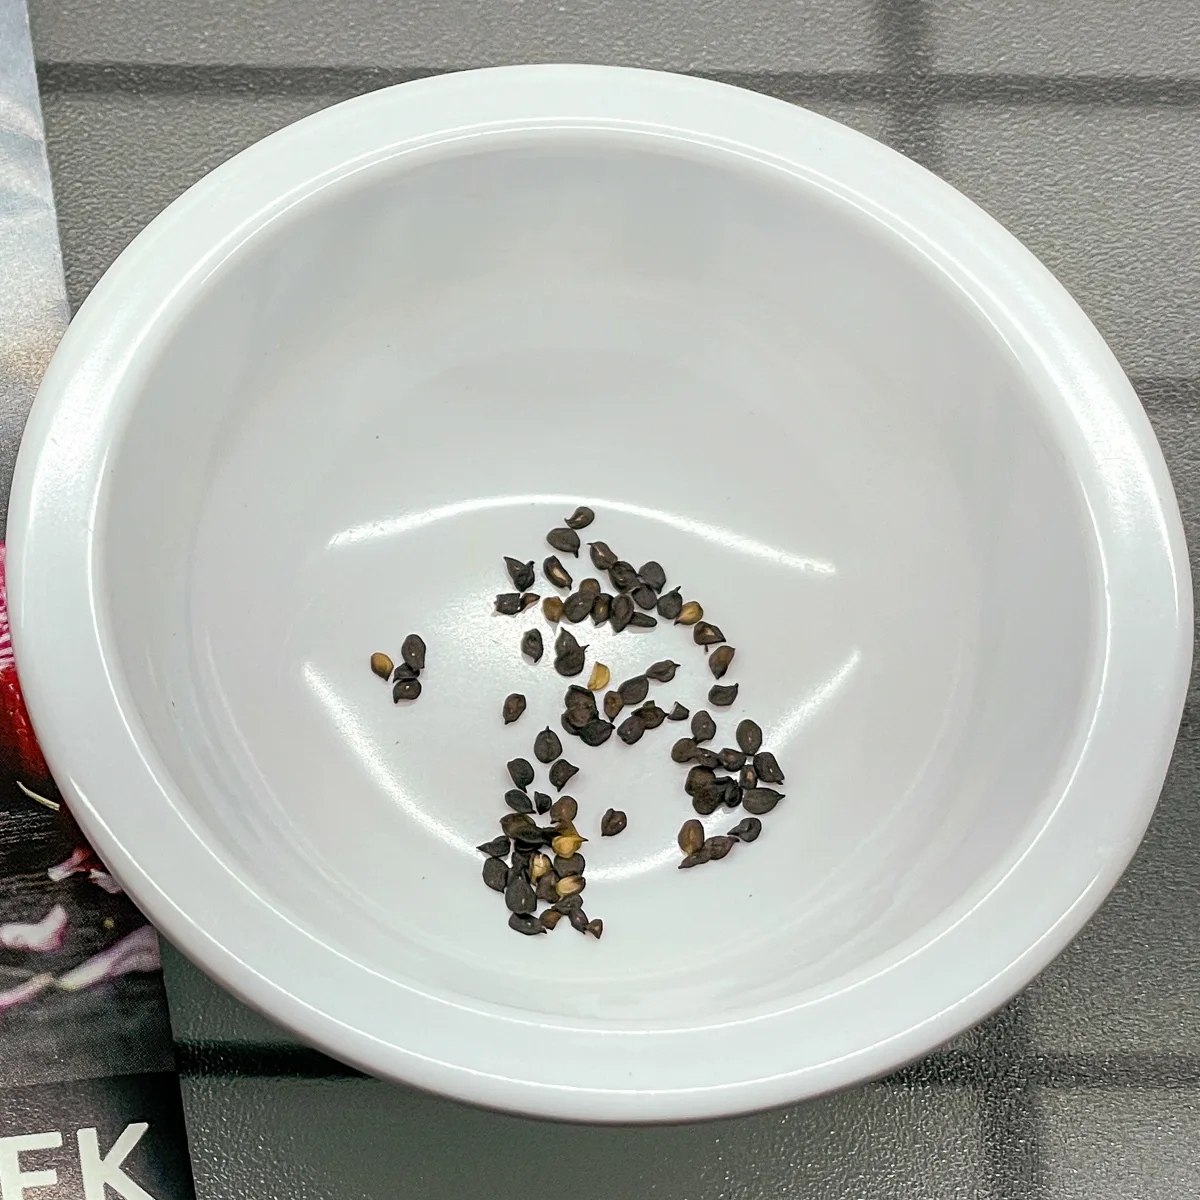 dianthus seeds in small white bowl